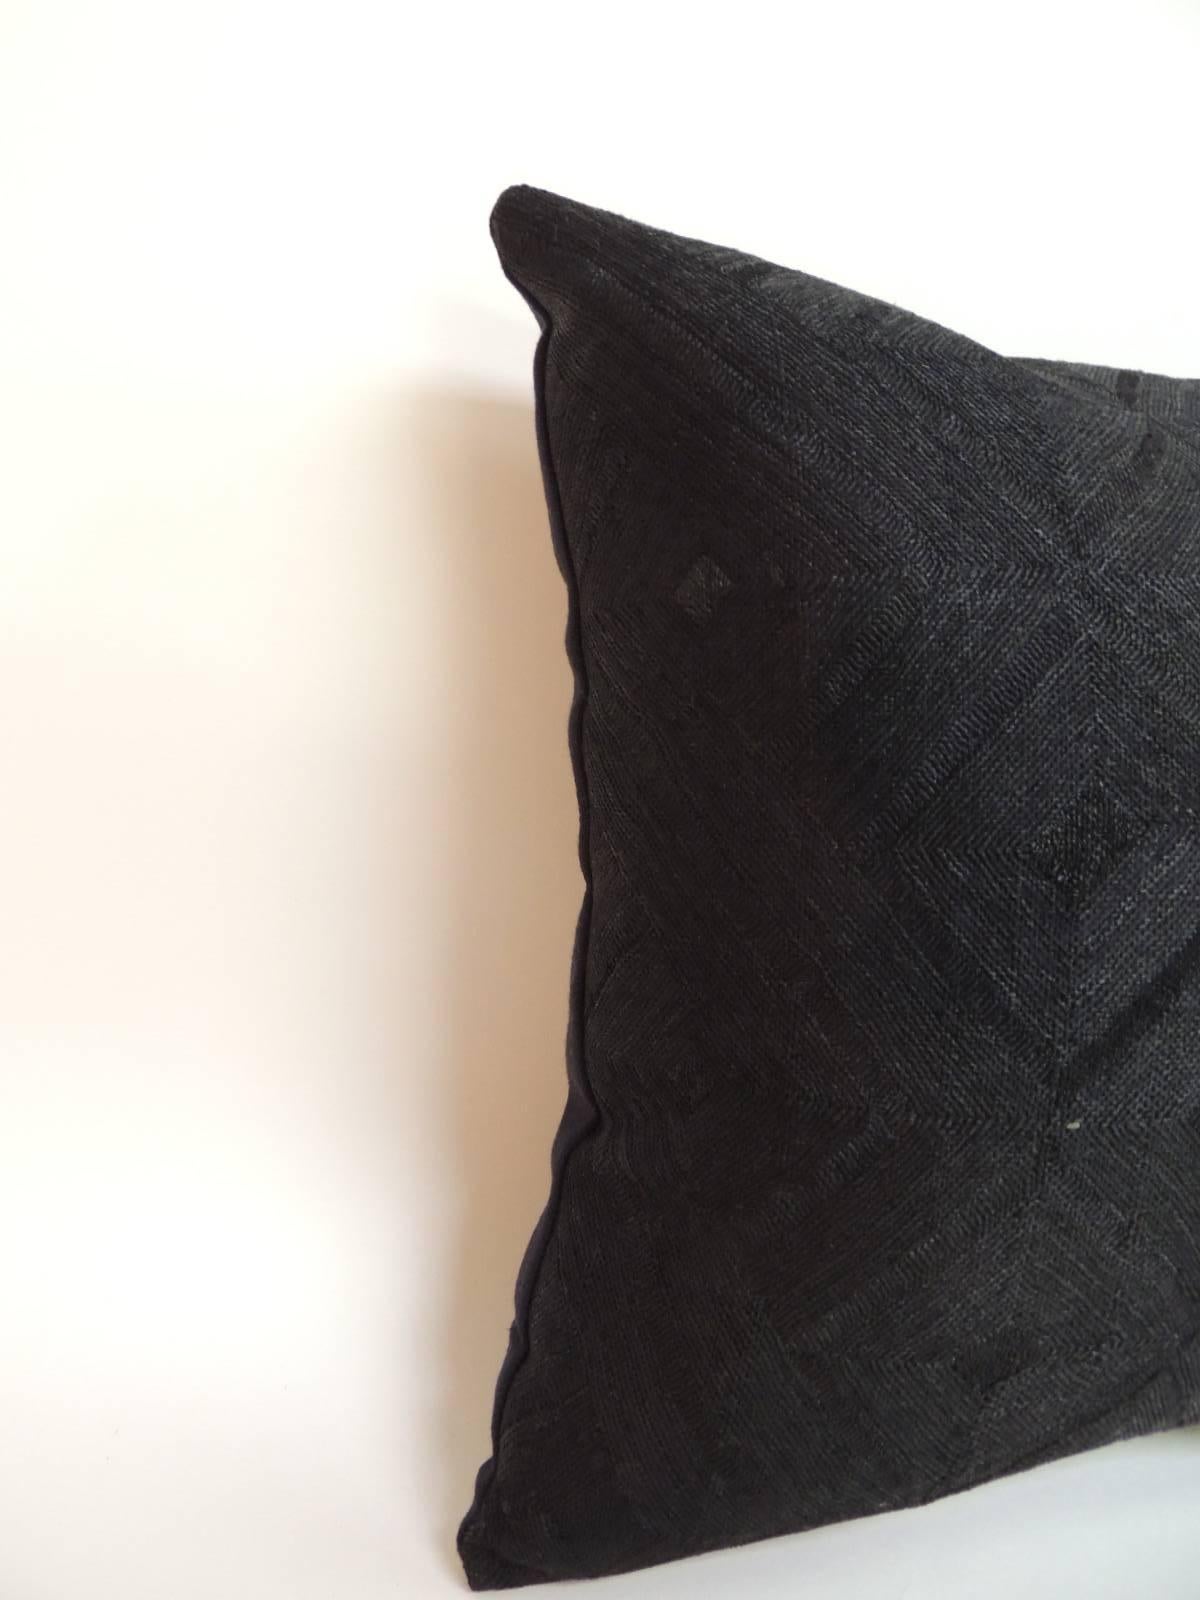 Unusual black dyed hand woven raffia decorative pillow with black textured linen backing. Decorative pillow designed and handcrafted in the USA. Hand-stitched closure (no zipper.) custom-made pillow insert. The word Kuba means lighting referring to